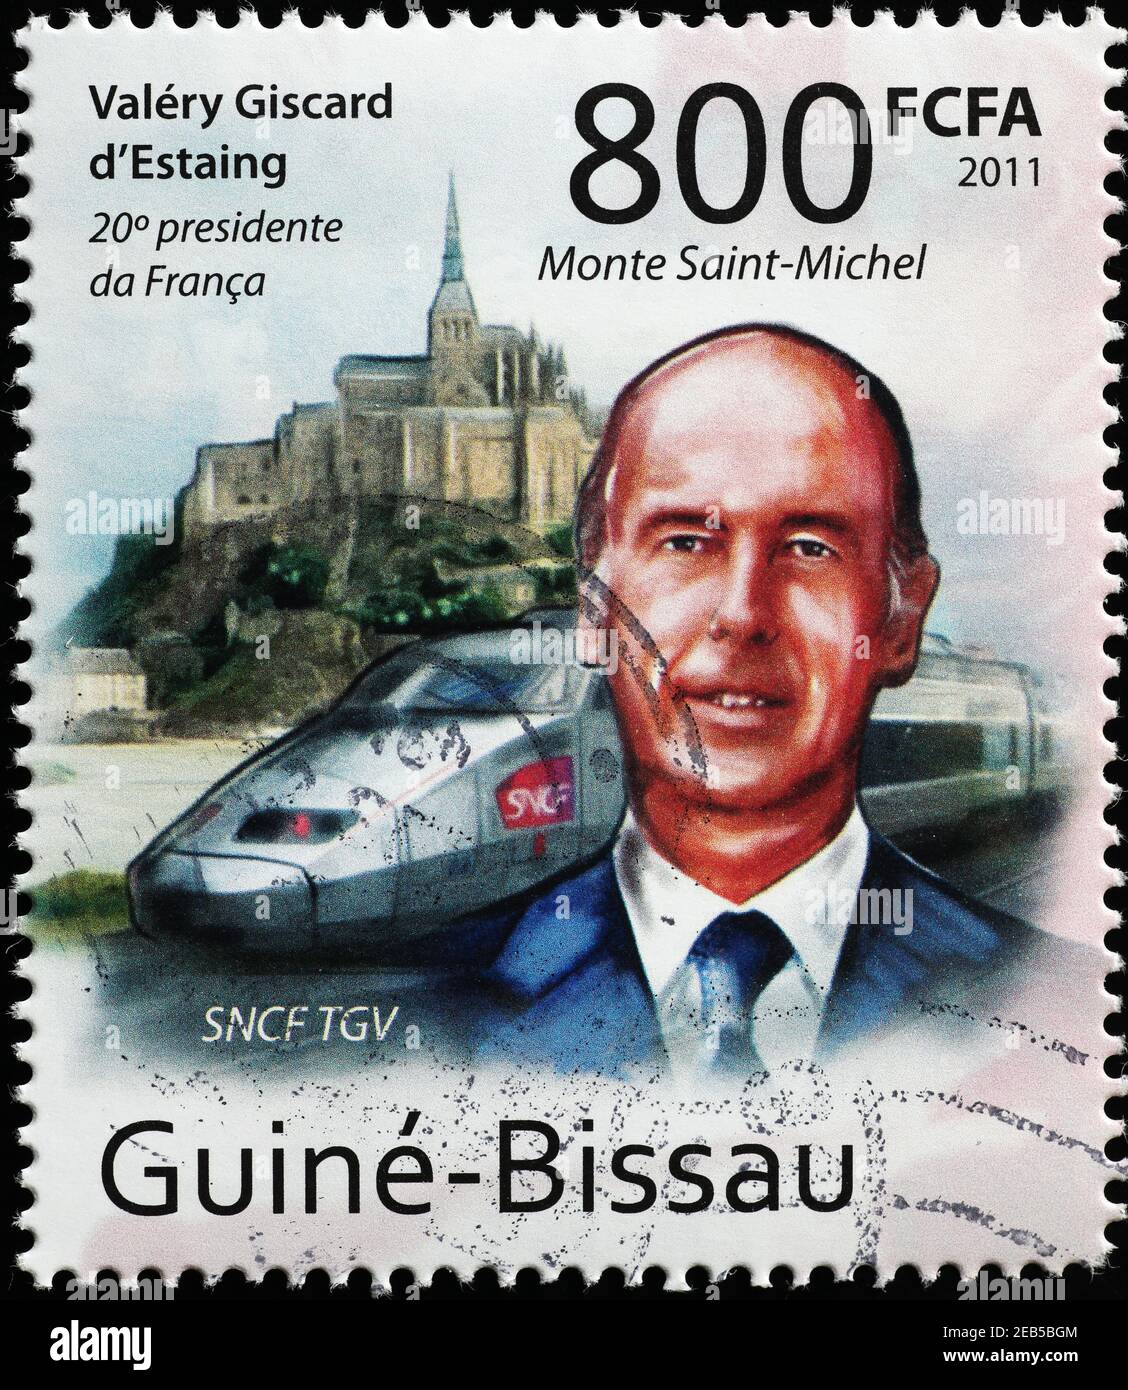 Valery Giscard d'Estaing portrait on postage stamp Stock Photo